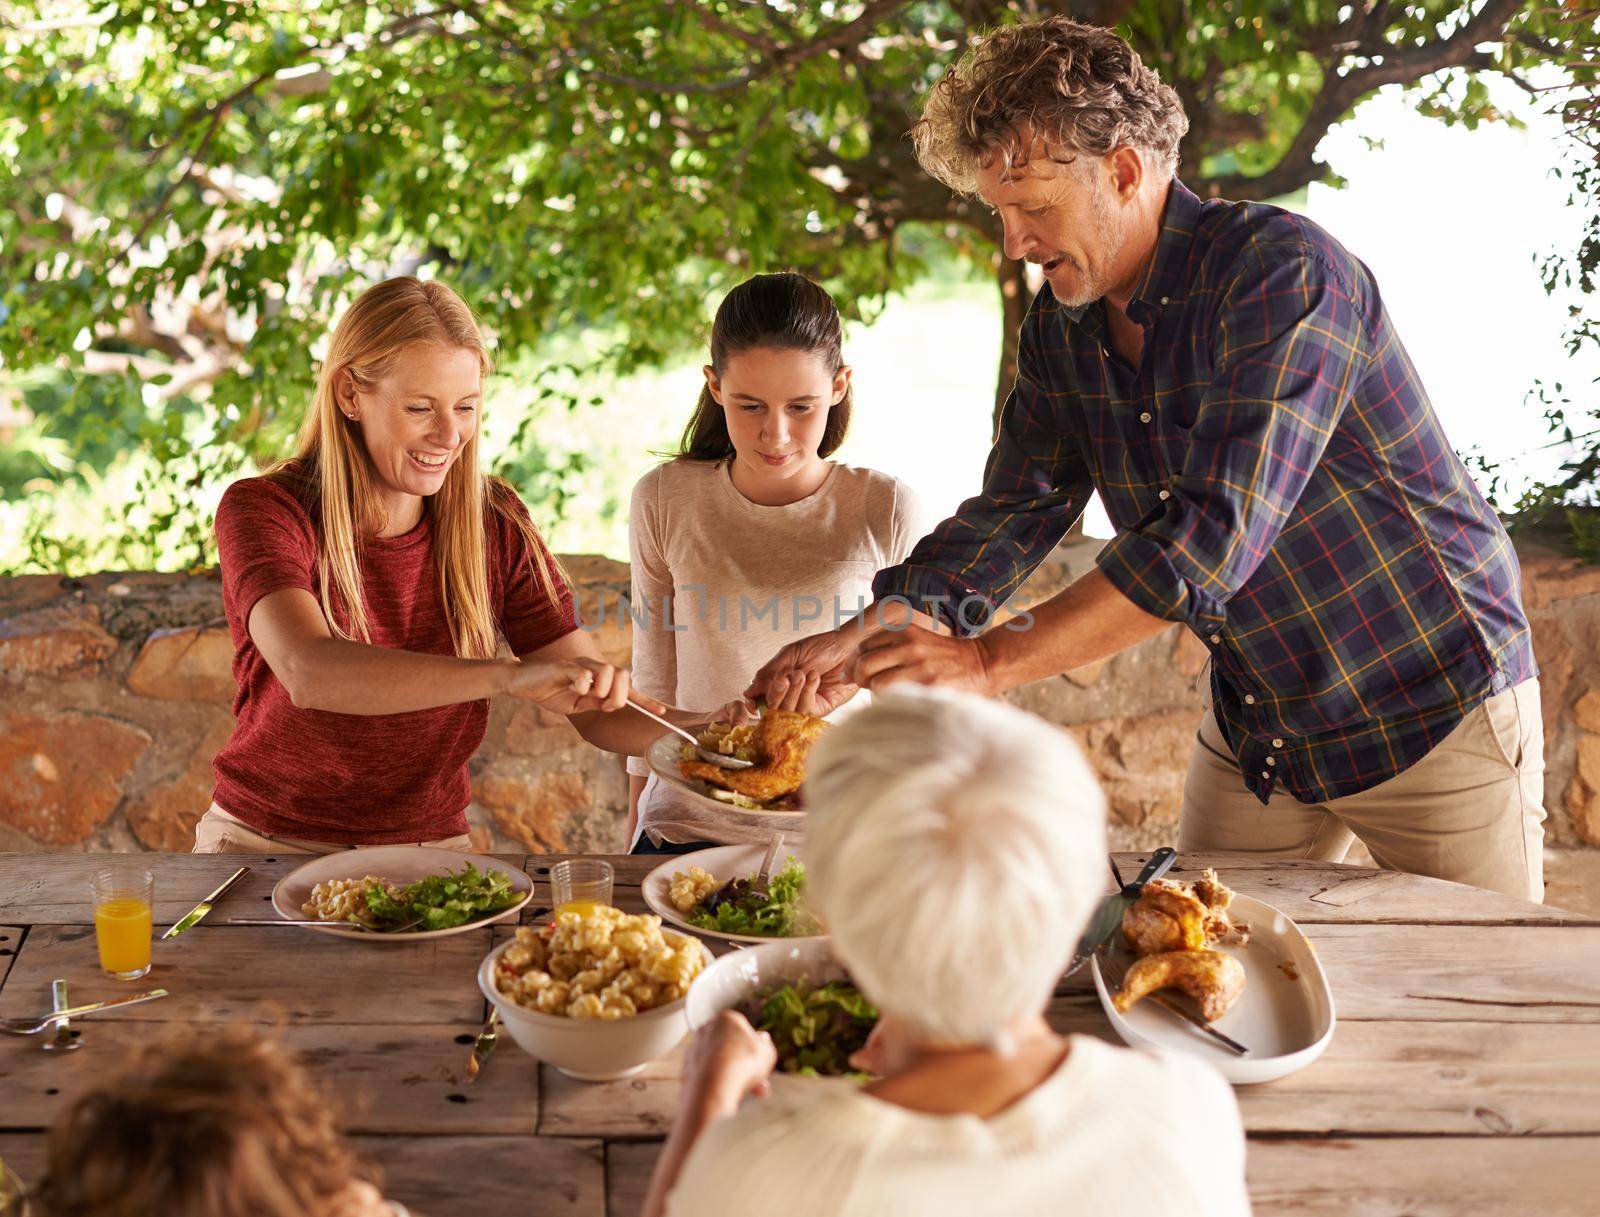 A view of a family preparing to eat lunch together outdoors.